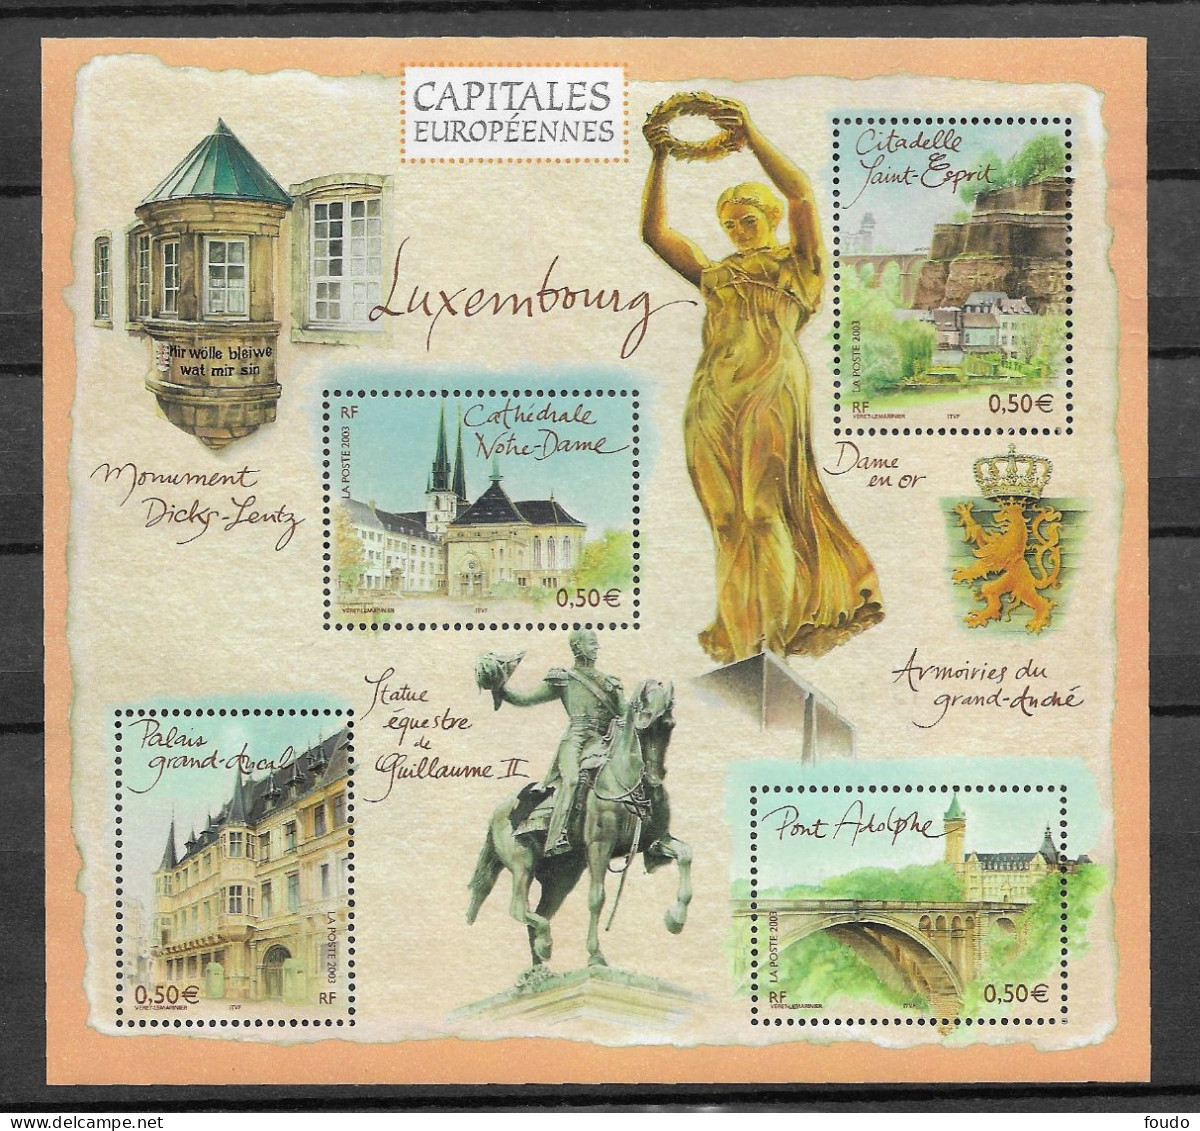 France 2003 - Yv N° BF 64 ** - Capital Européennes Luxembourg - Mint/Hinged